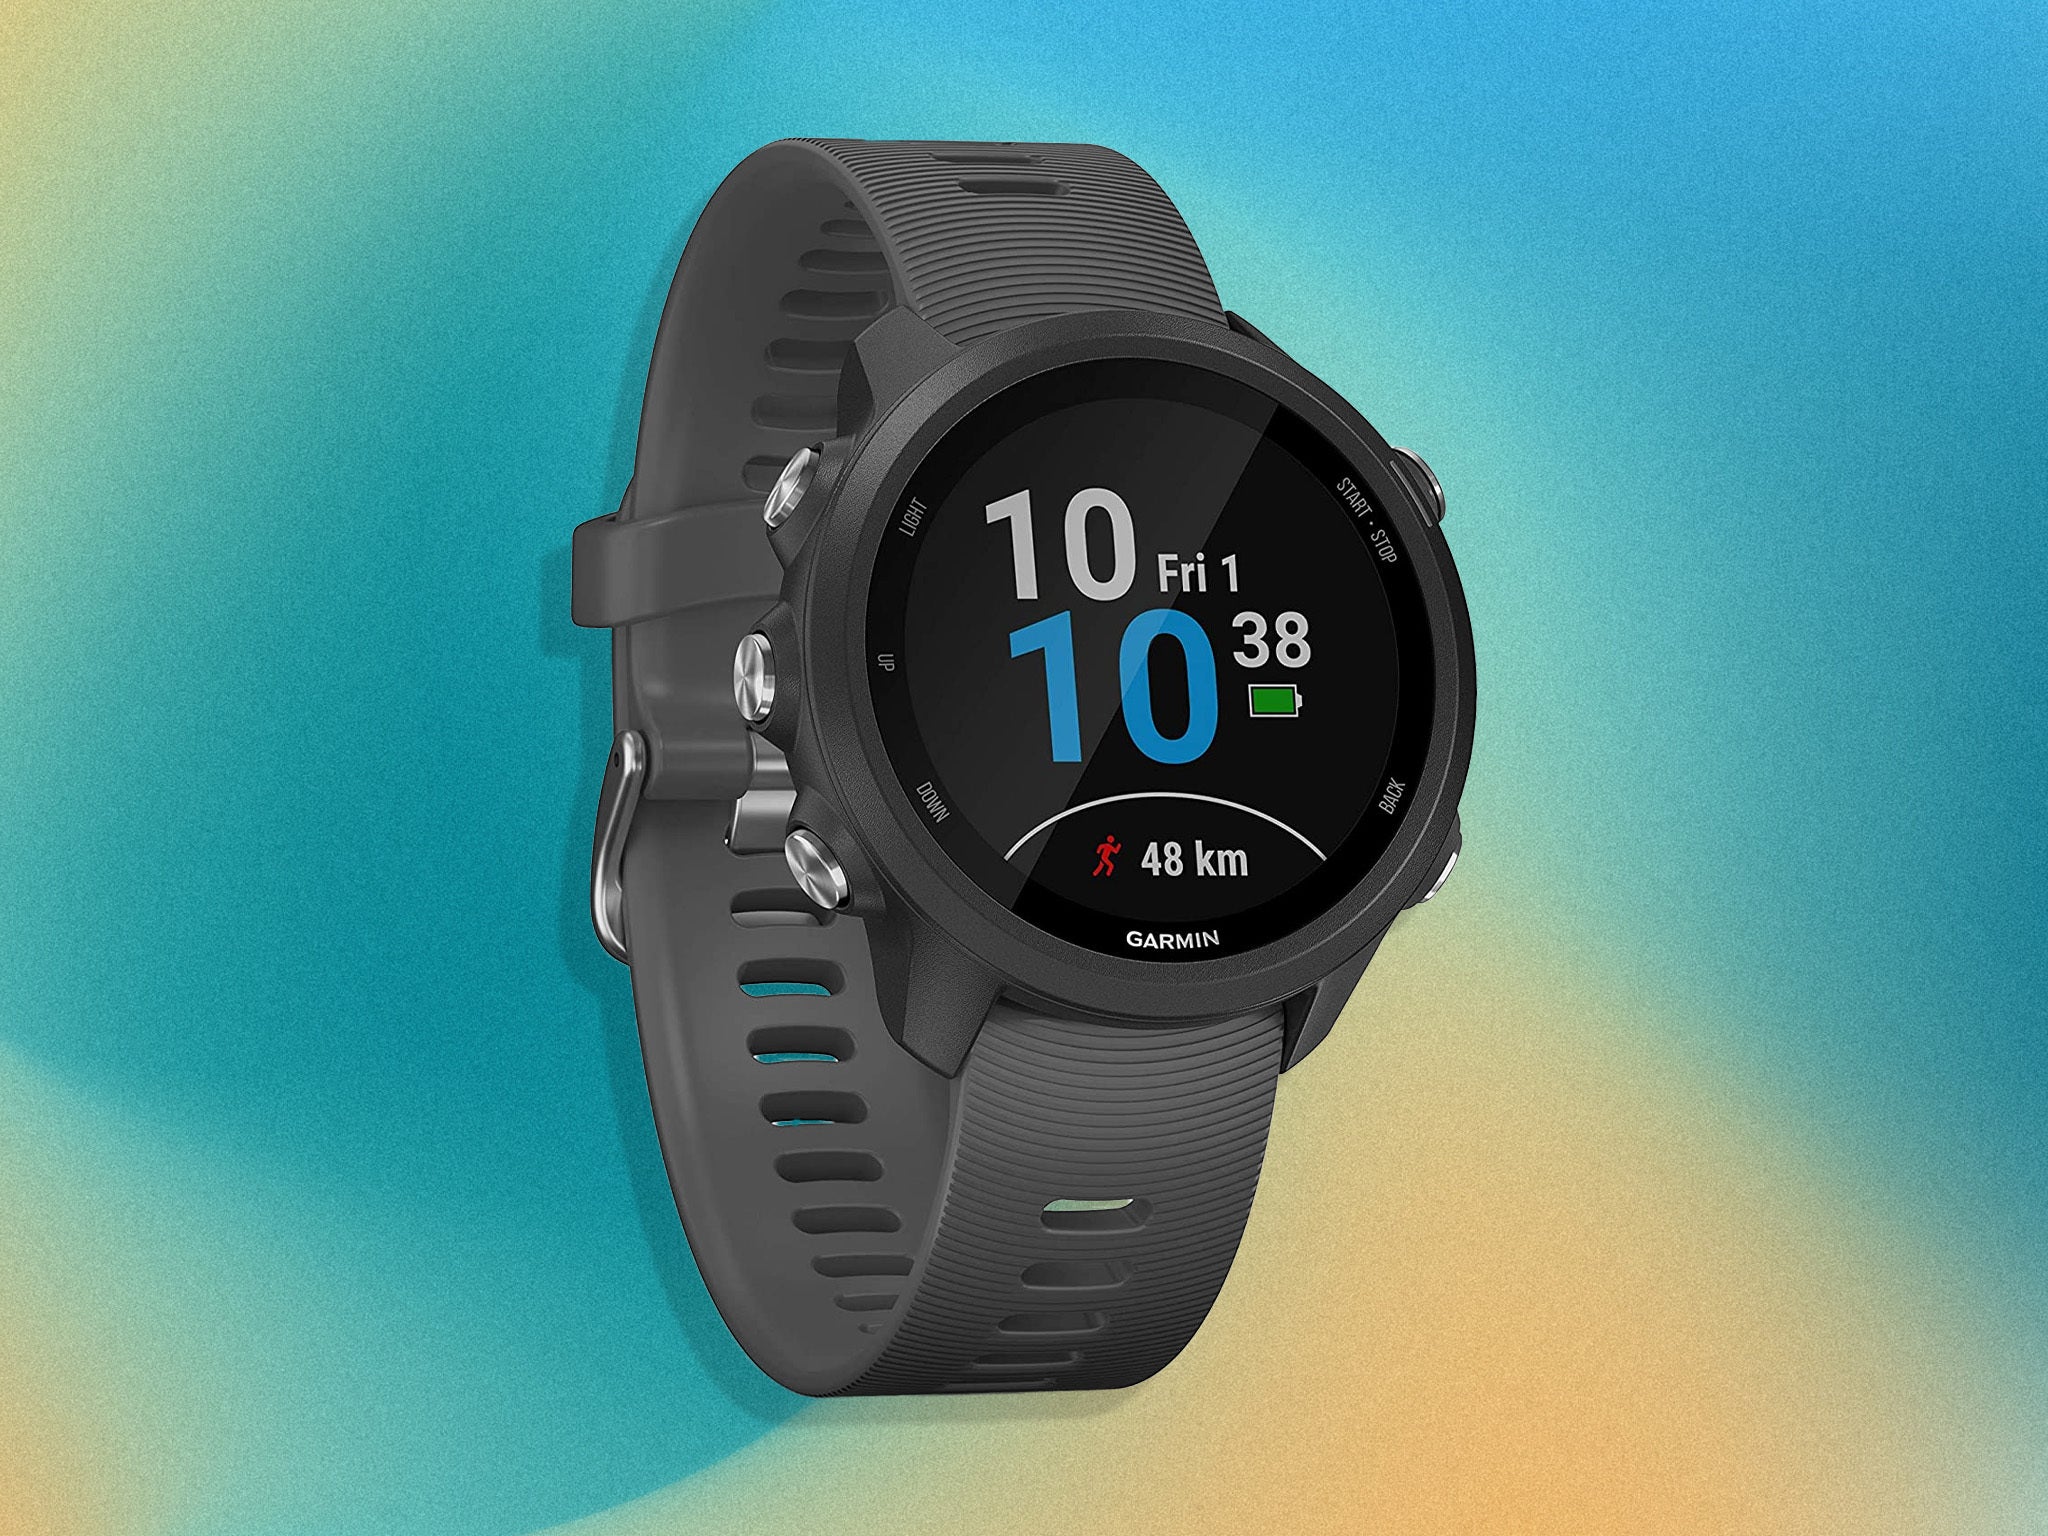 With built-in GPS, the watch measures pace and routes, while tracking your heart rate